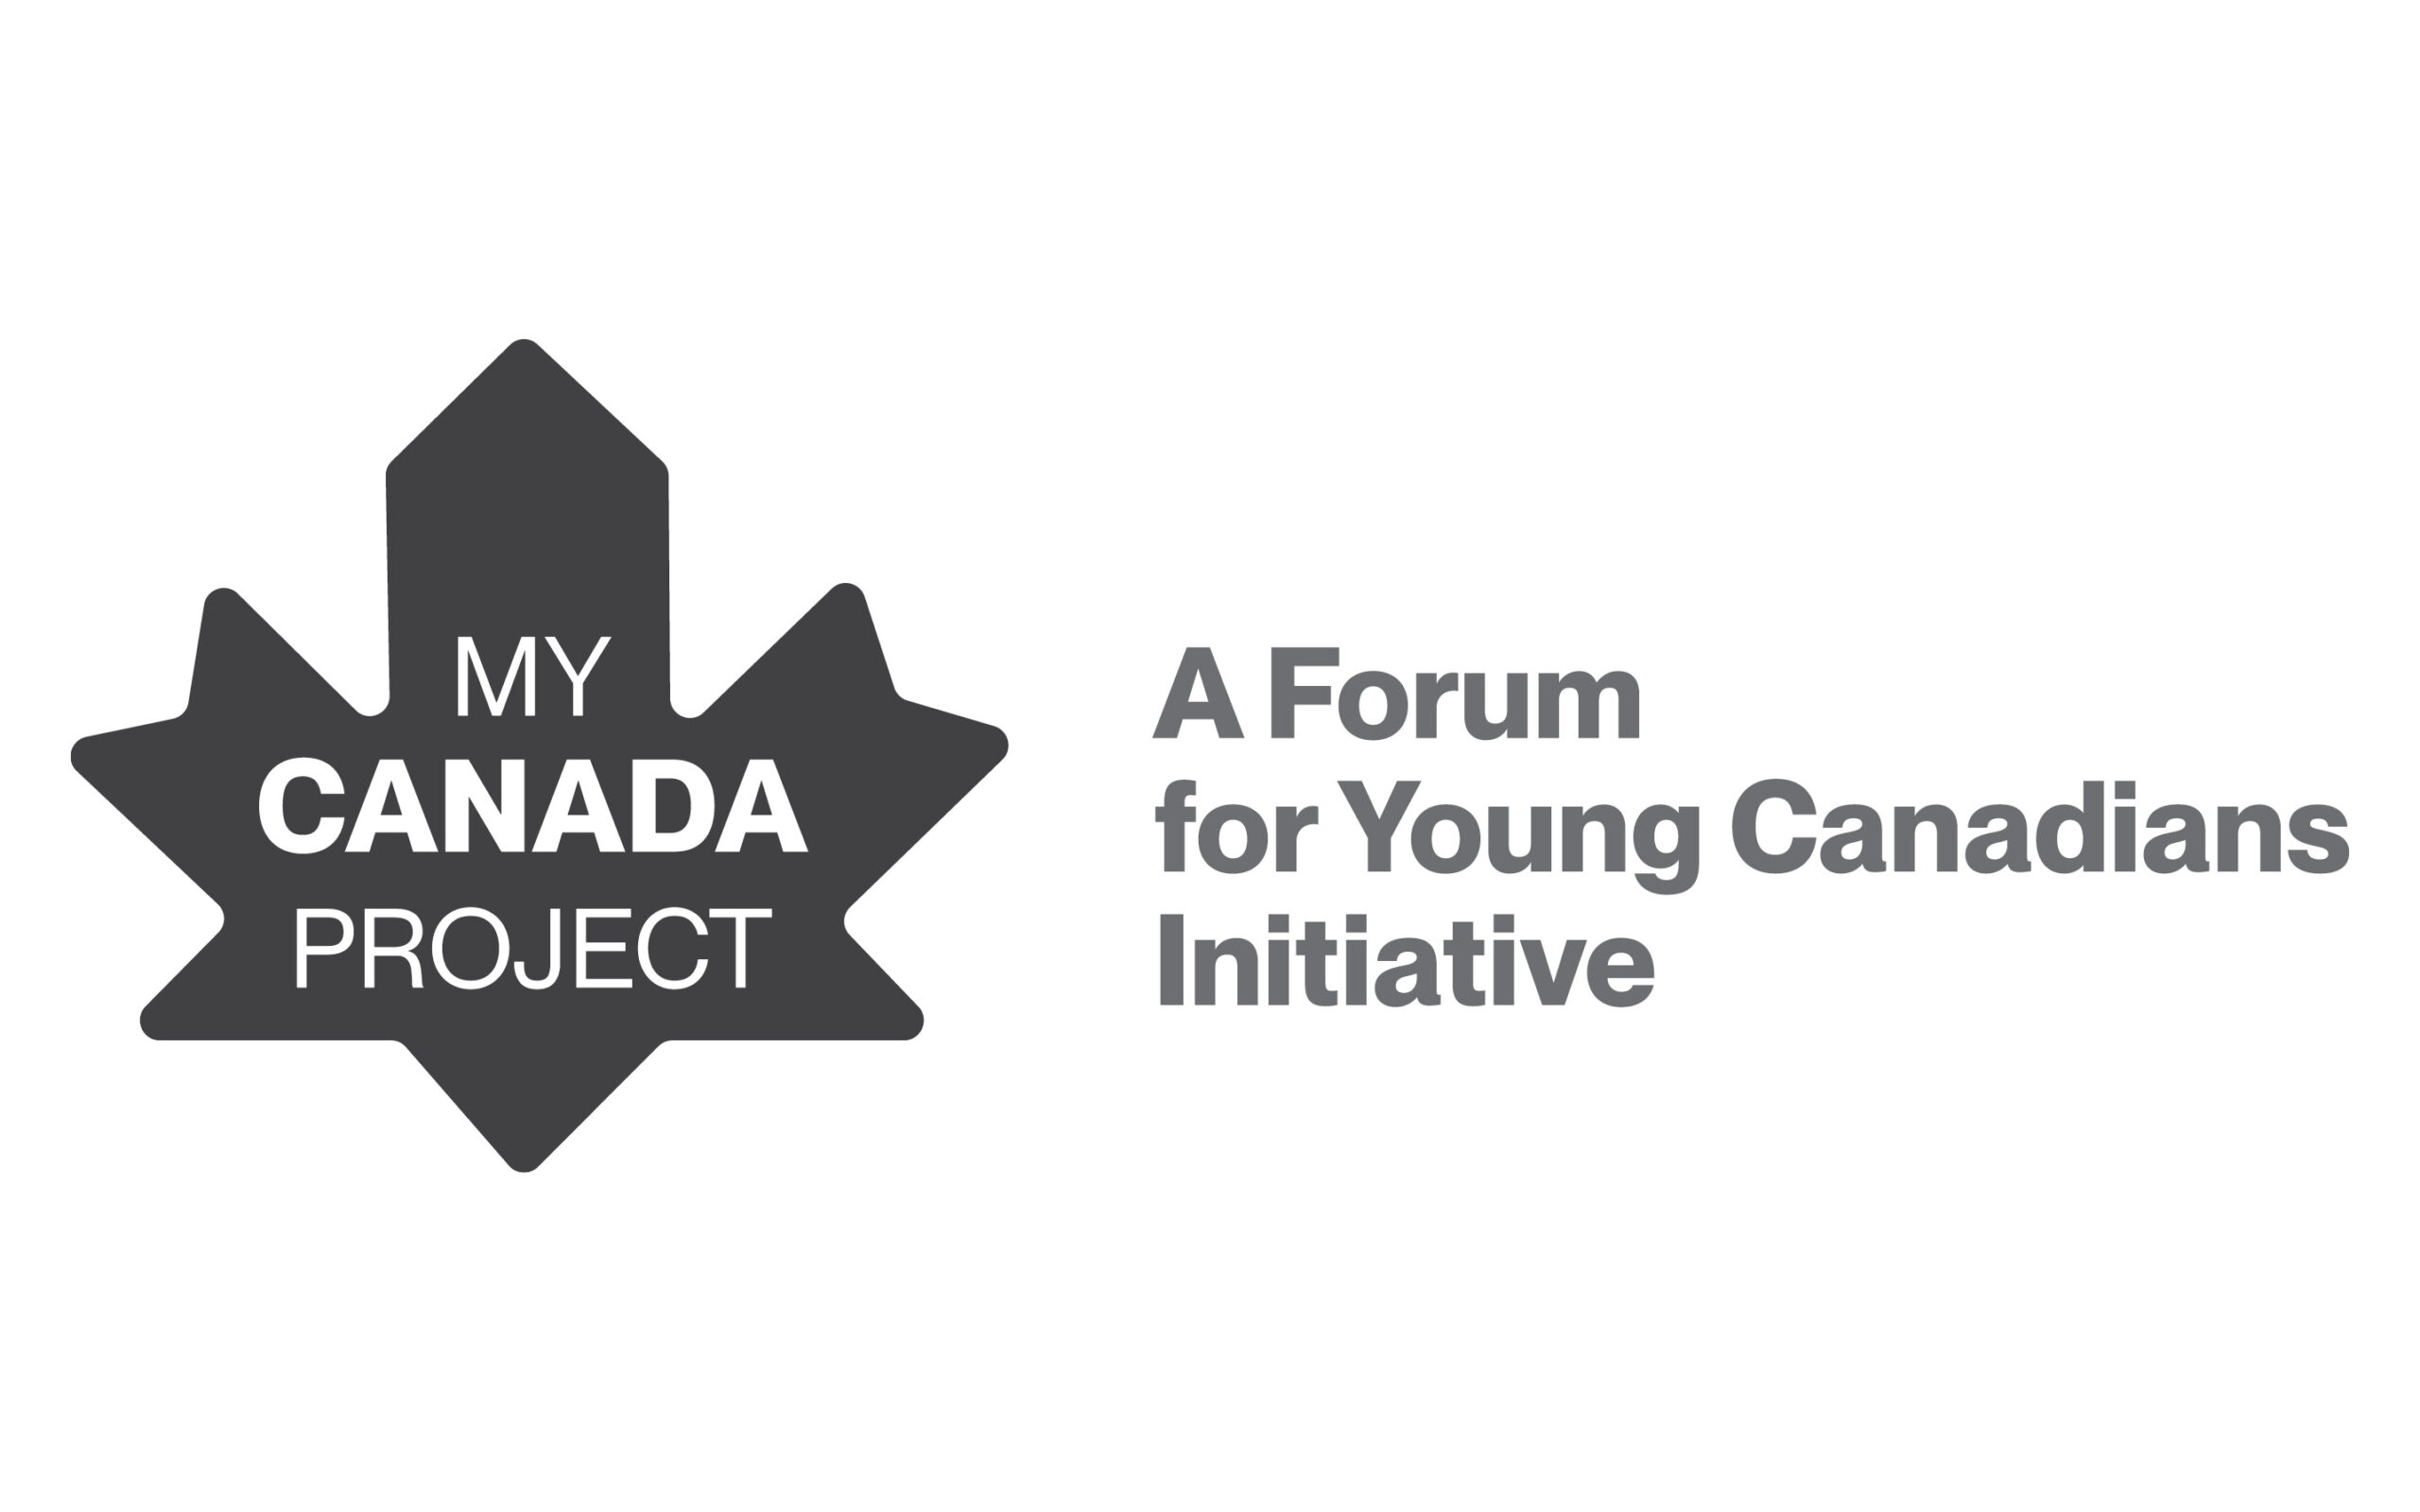 My Canada Project banner. The image is in greyscale. There is a Canada maple leaf on the left side, with the words “My Canada Project” inside the maple leaf. On the right side of the image, text reads “A Forum for Young Canadians Initiative”.